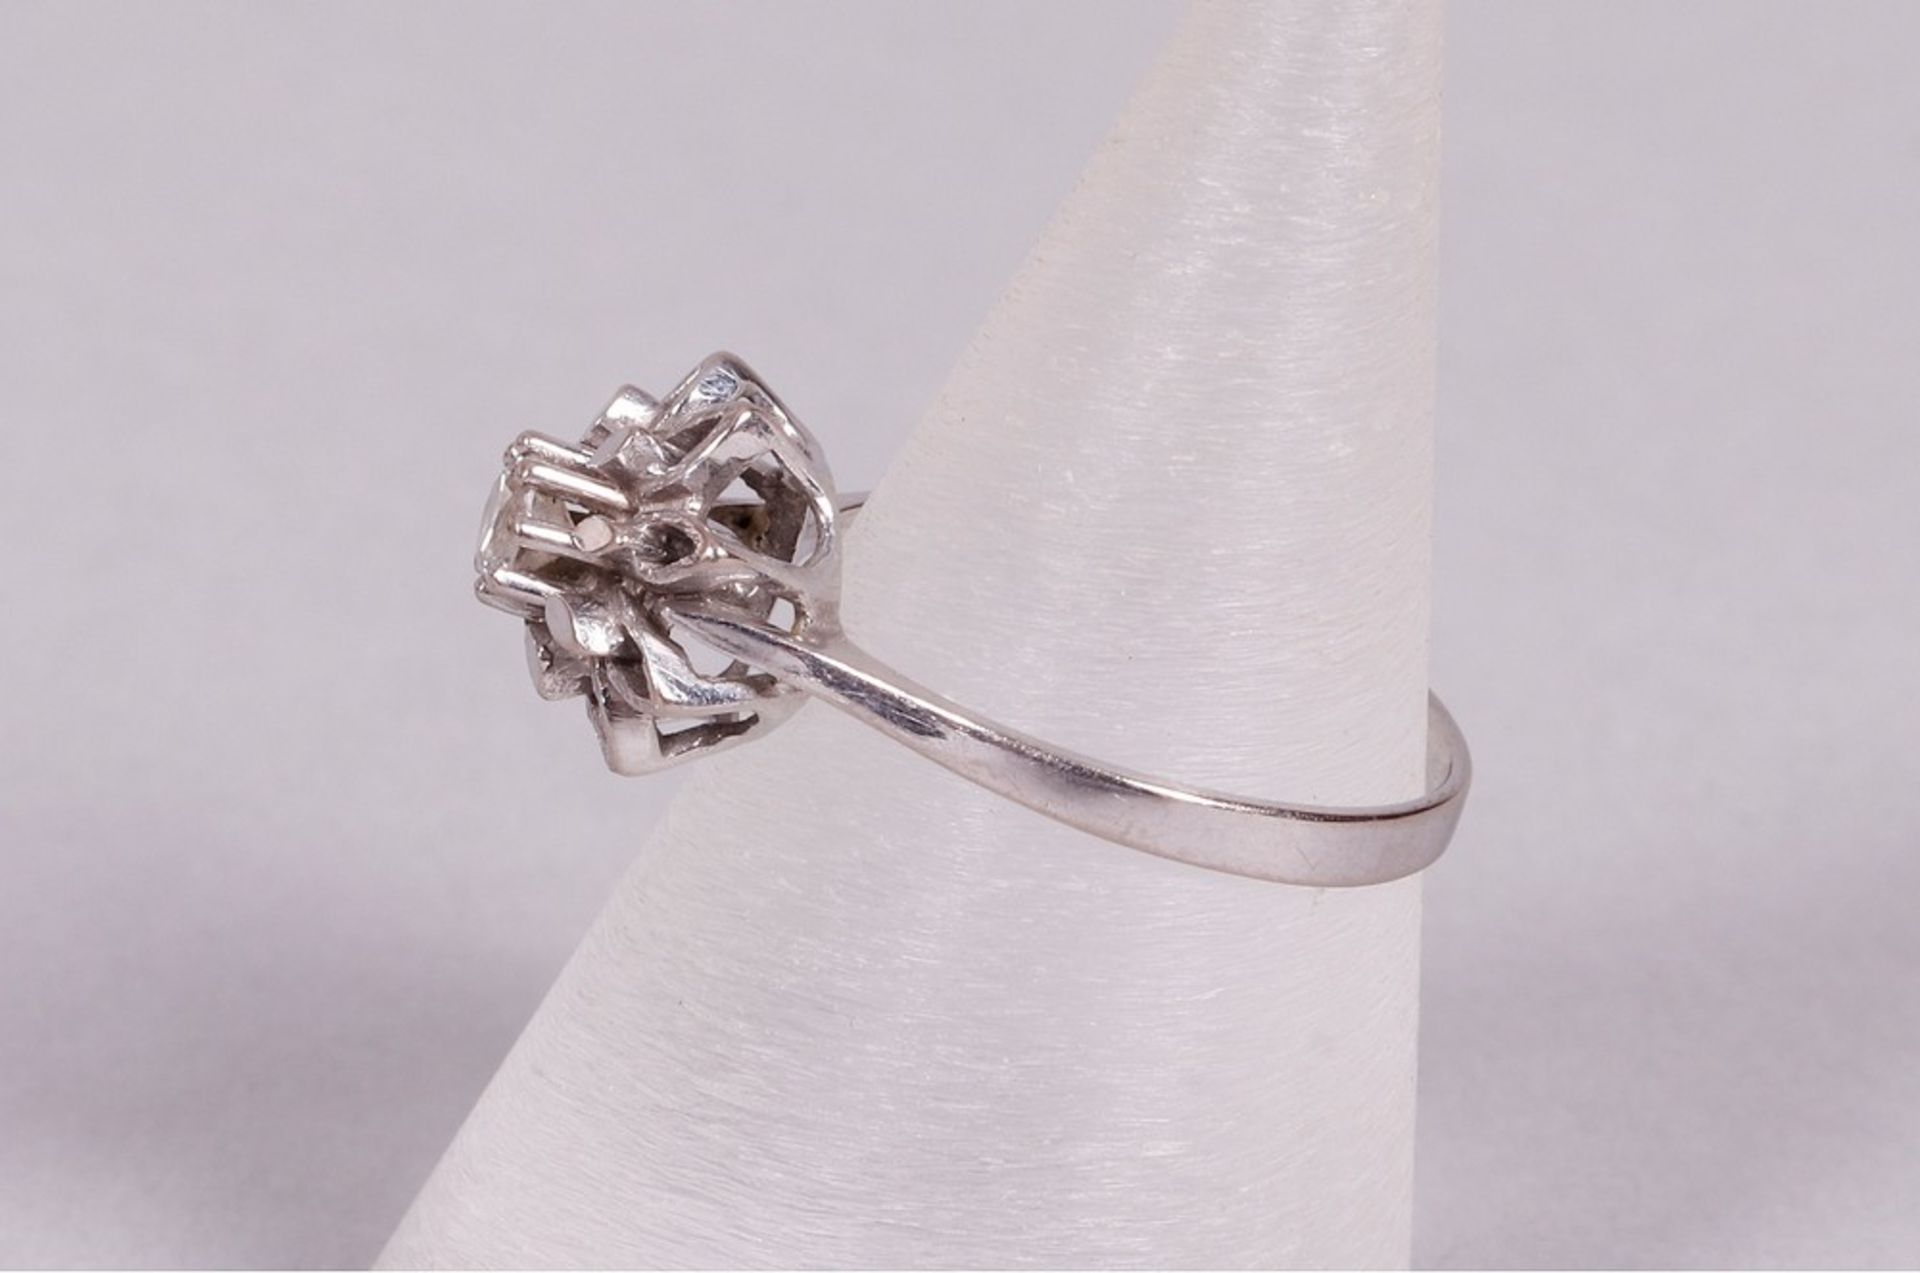 Solitaire ring, 585 WG - Image 2 of 5